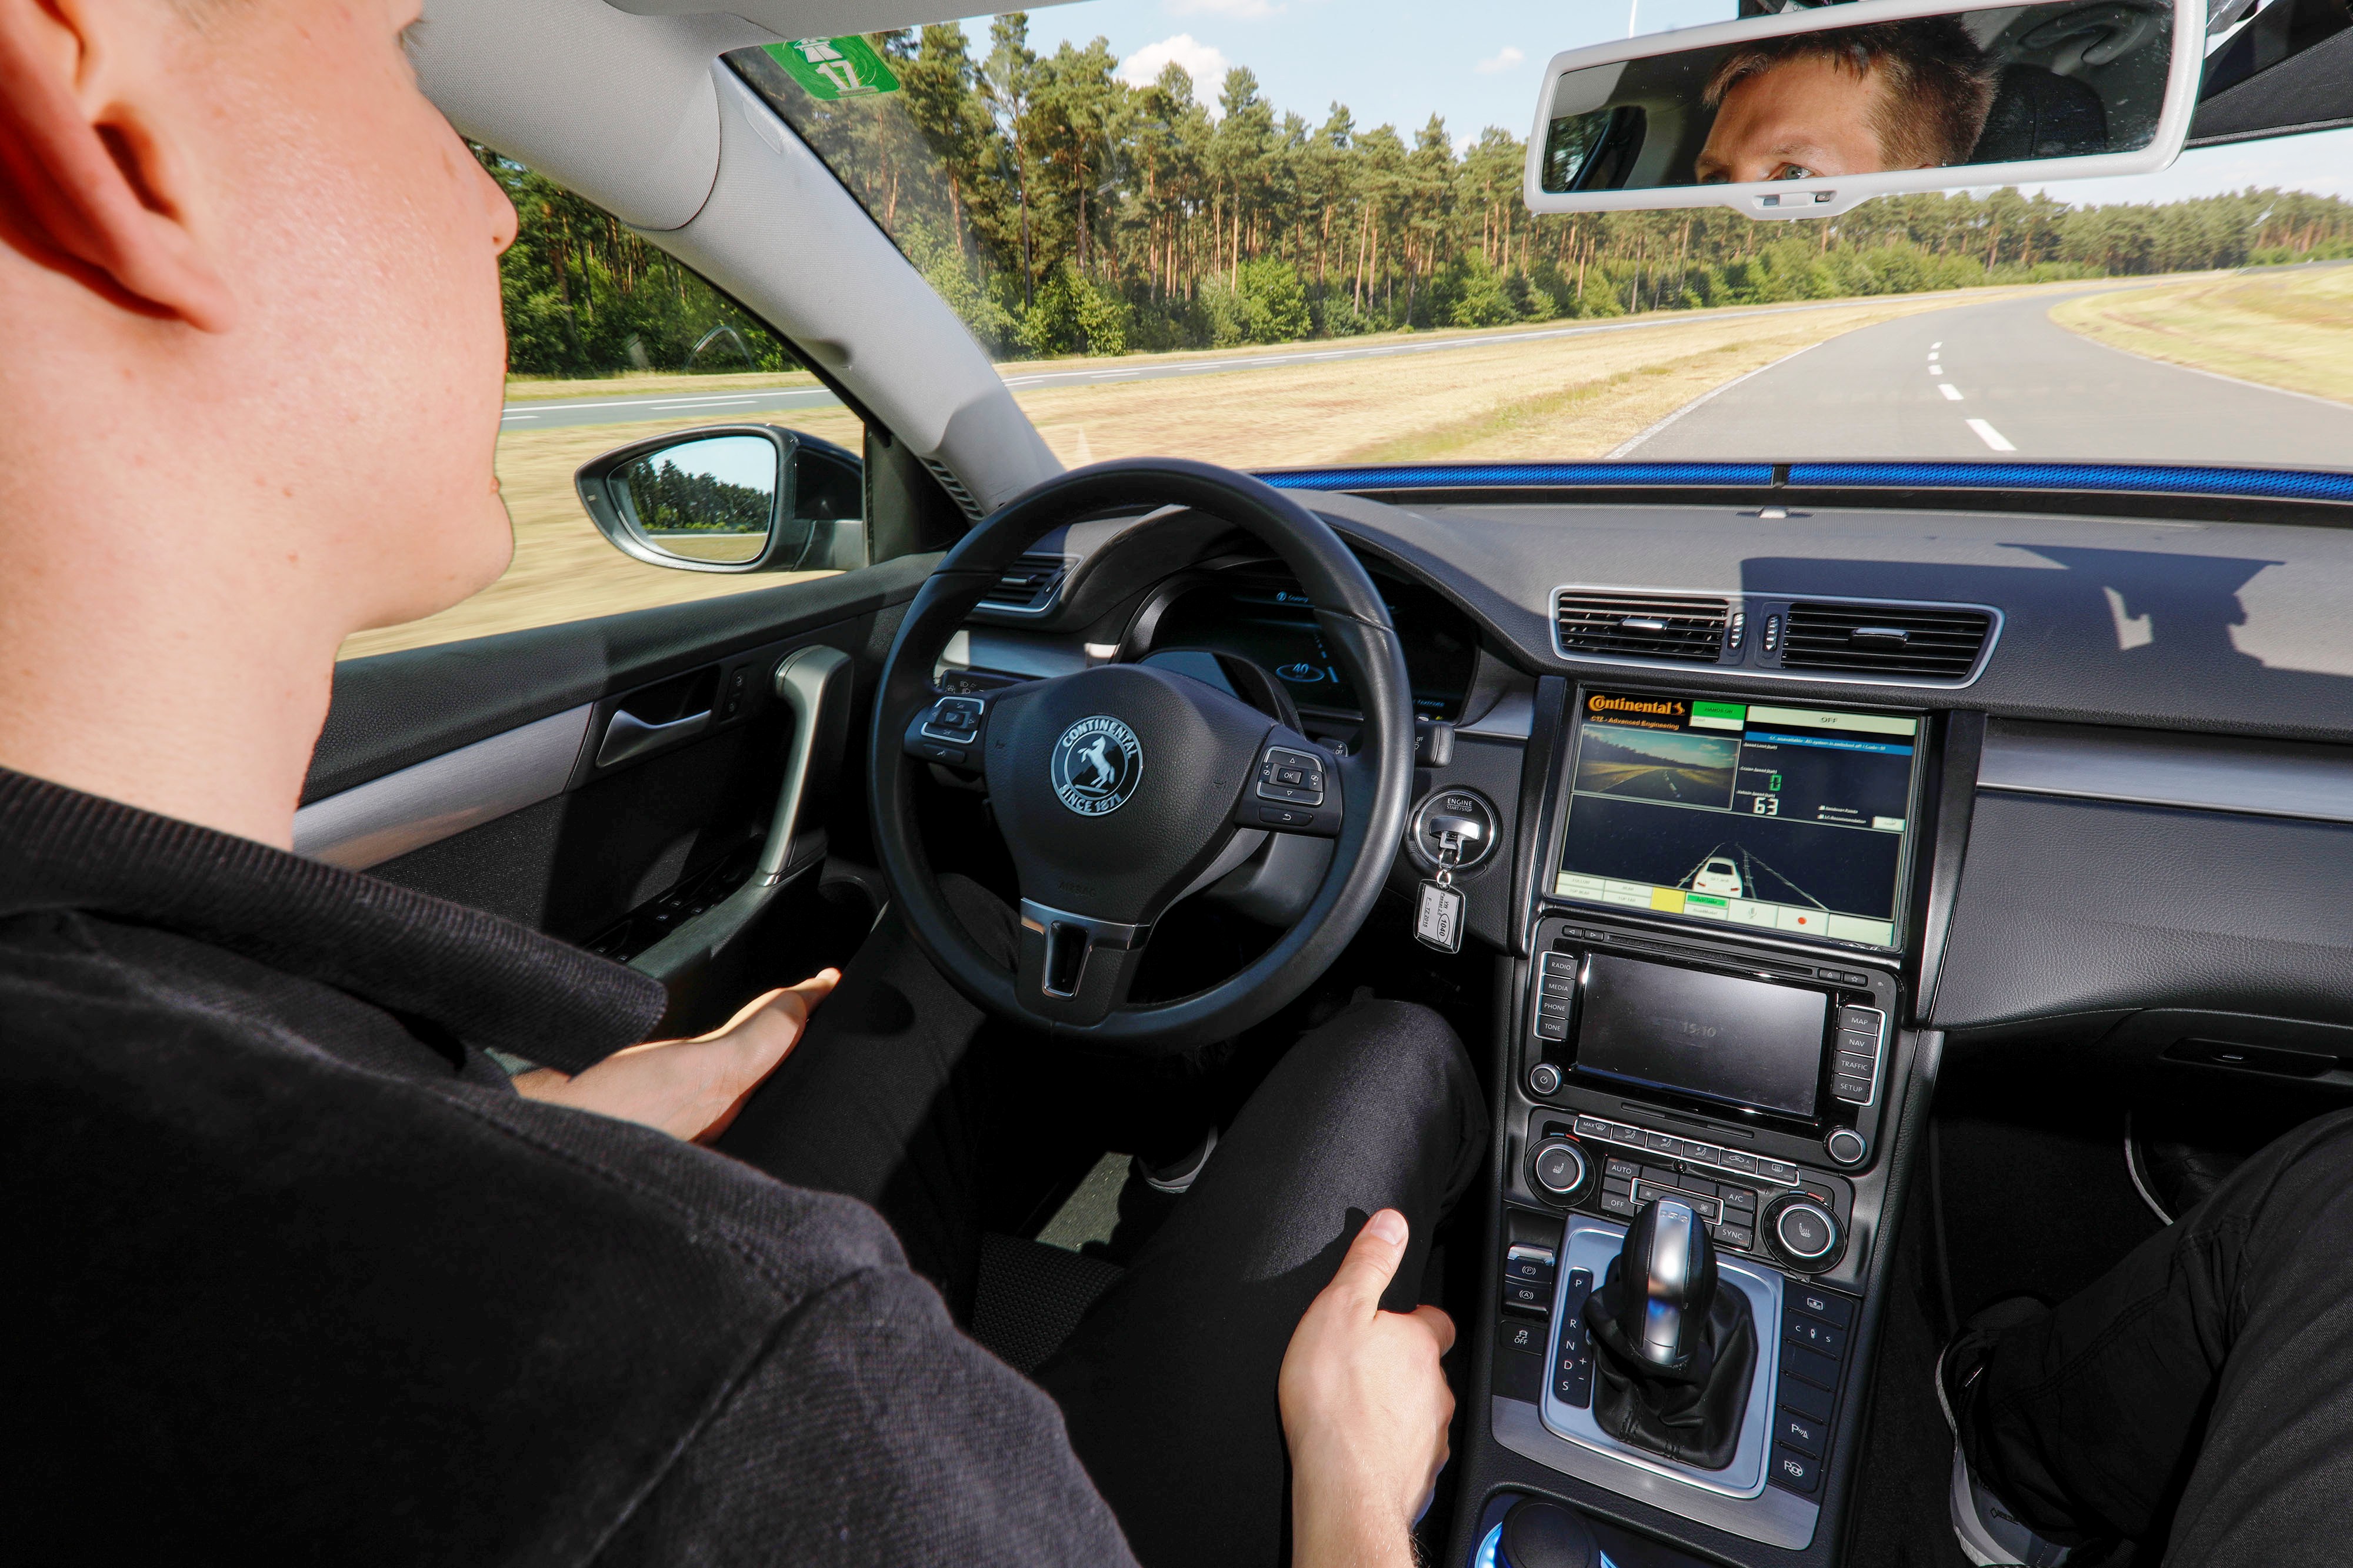 Highly Automated Driving on Highways Is No Longer Just a Dream